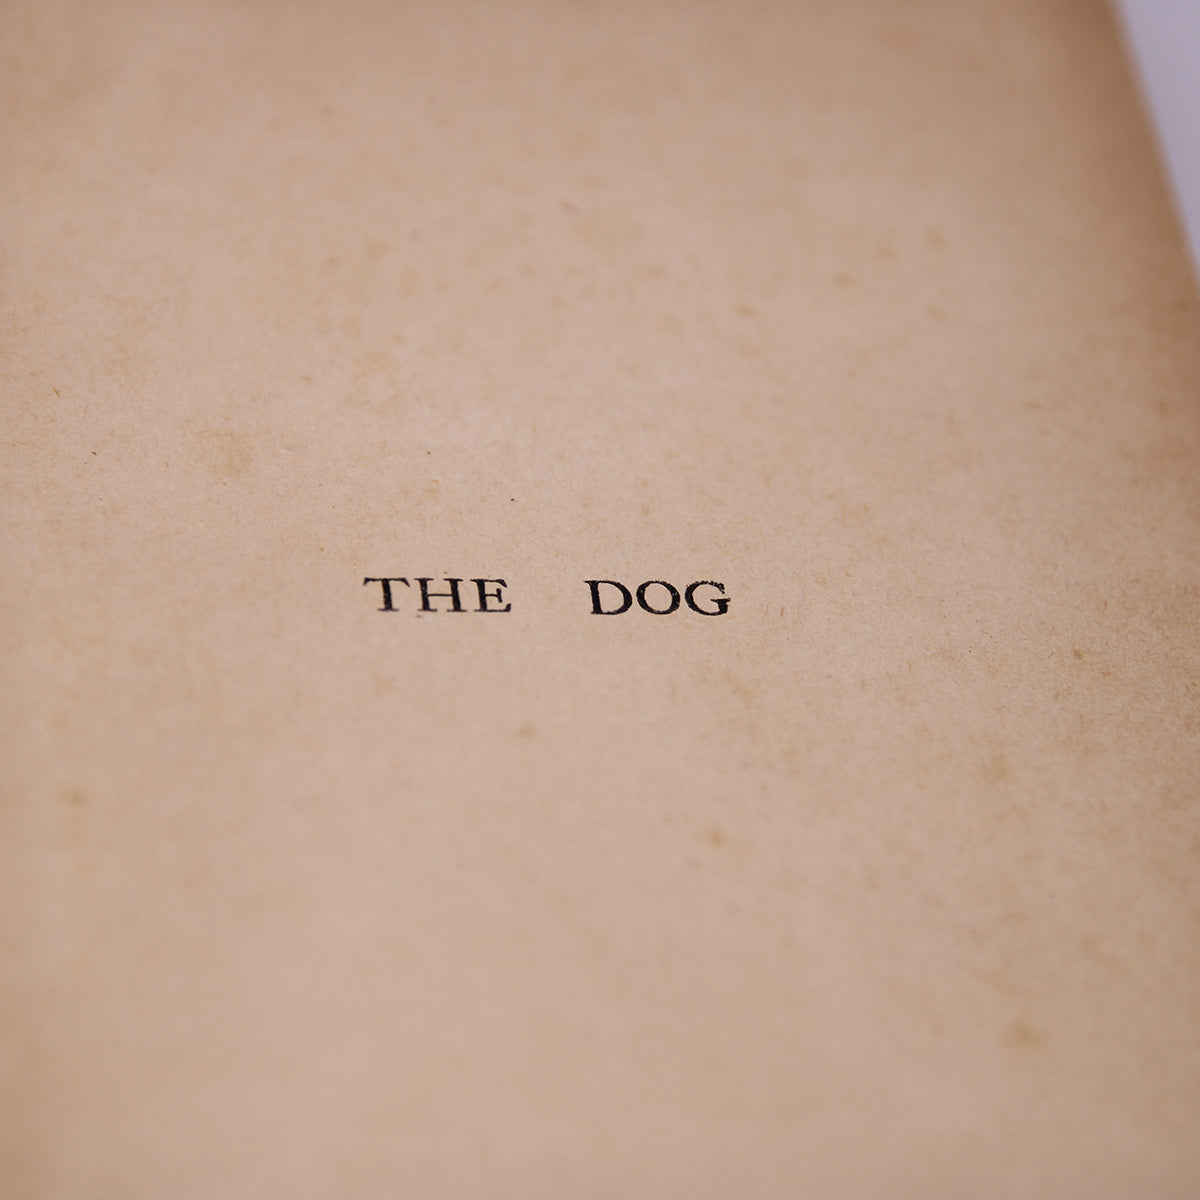 The Dog in Health and Disease 1st Ed (1906)